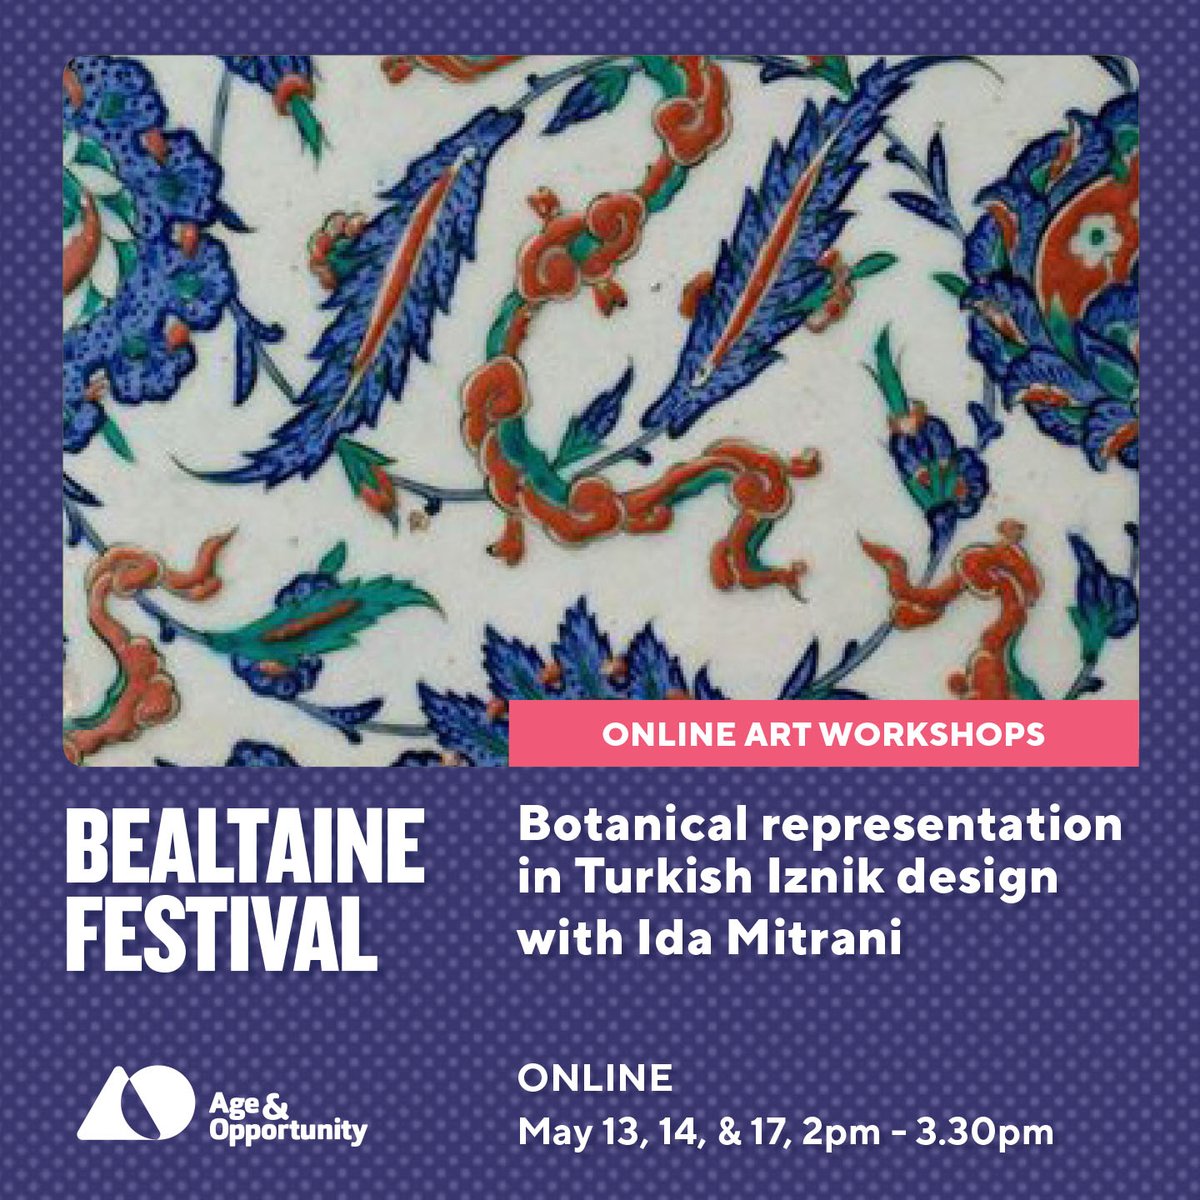 🌿 Dive into Turkish Iznik design with artist Ida Mitrani! Join this online workshop series on May 13, 14, & 17. Explore botanical motifs, drawing, and color charts inspired by Ottoman design. Suitable for all levels. Don't miss out! Tickets: ow.ly/aR5I50Ryq91